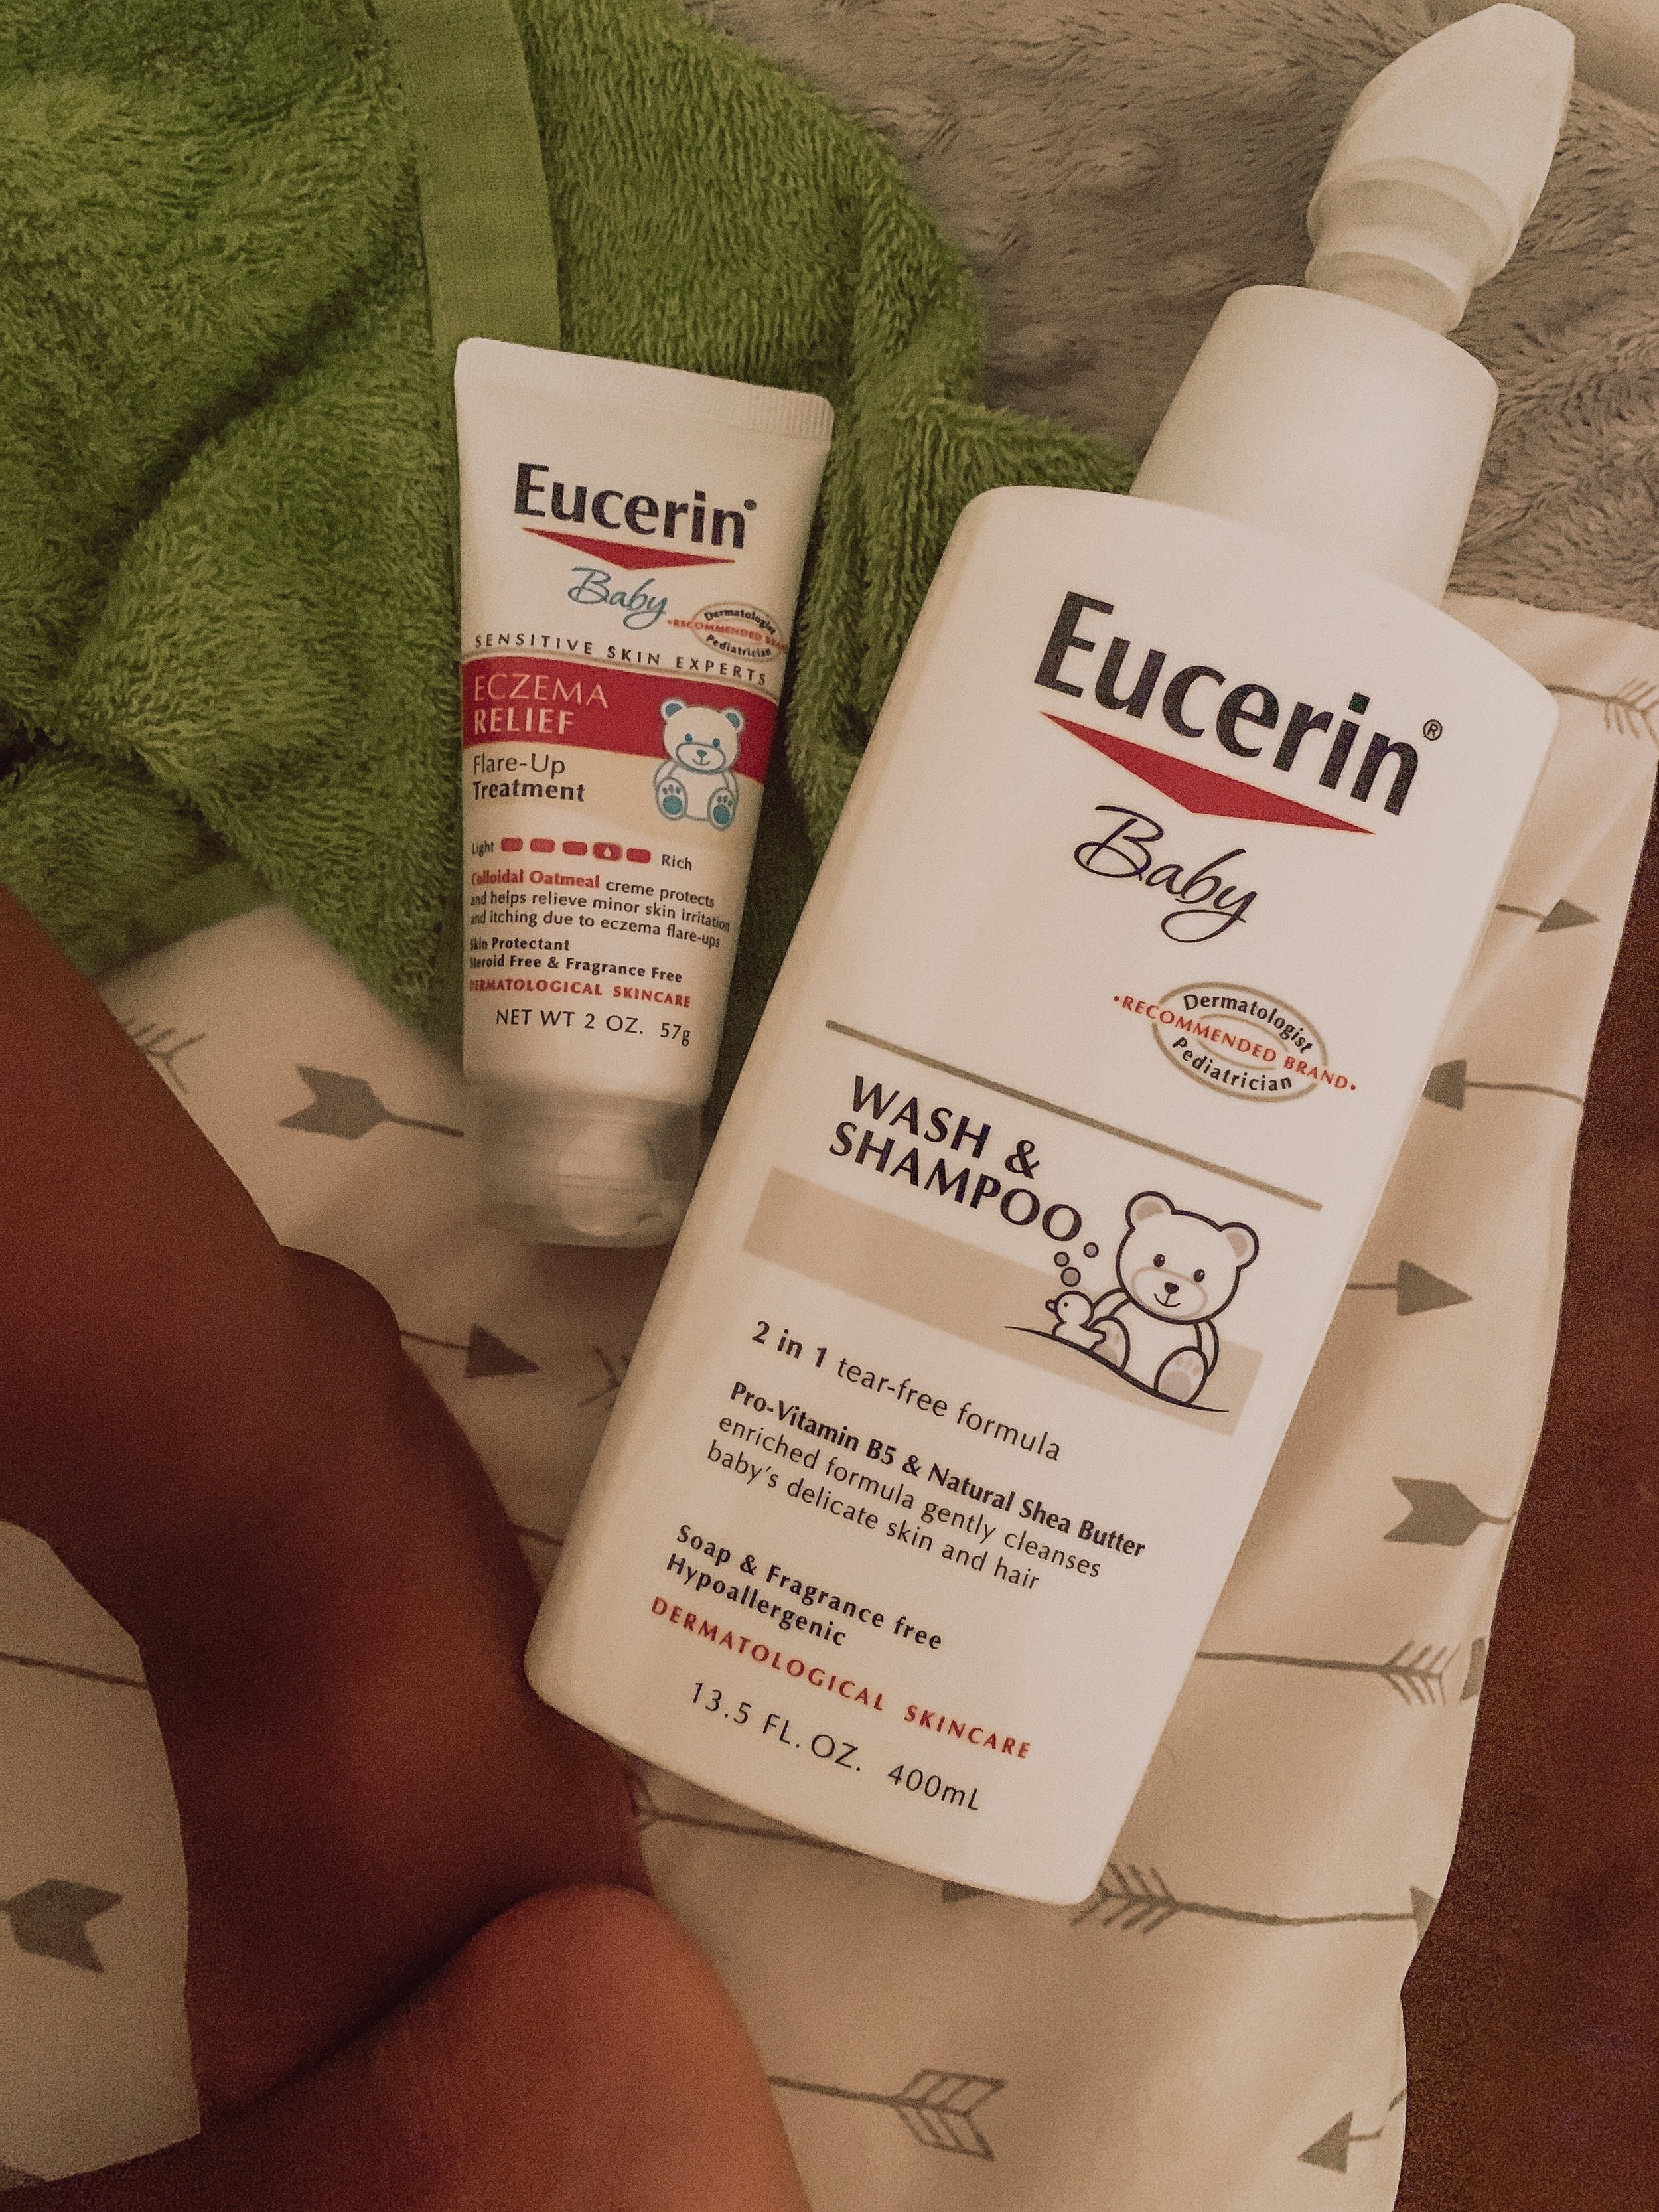 Mary Kristus Blåt mærke Mom-Approved: Eucerin Baby Wash is my secret to treating my son's heat rash  — Dana Oliver | Beauty Expert, Journalist and On-Camera Talent